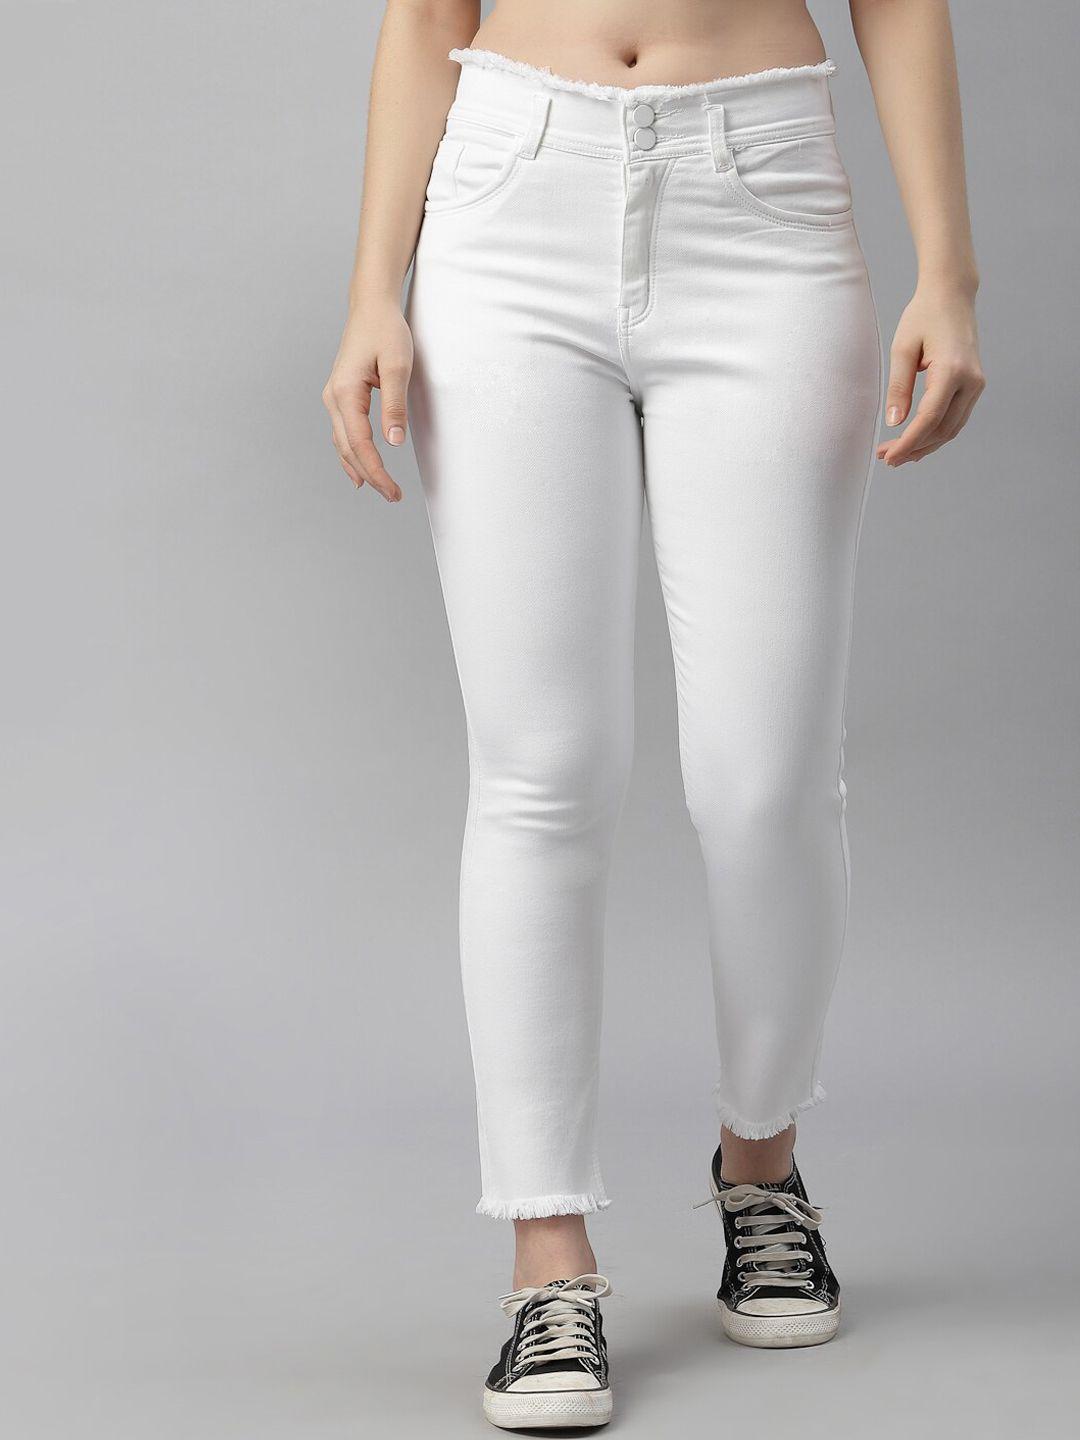 kassually-women-white-stretchable-jeans